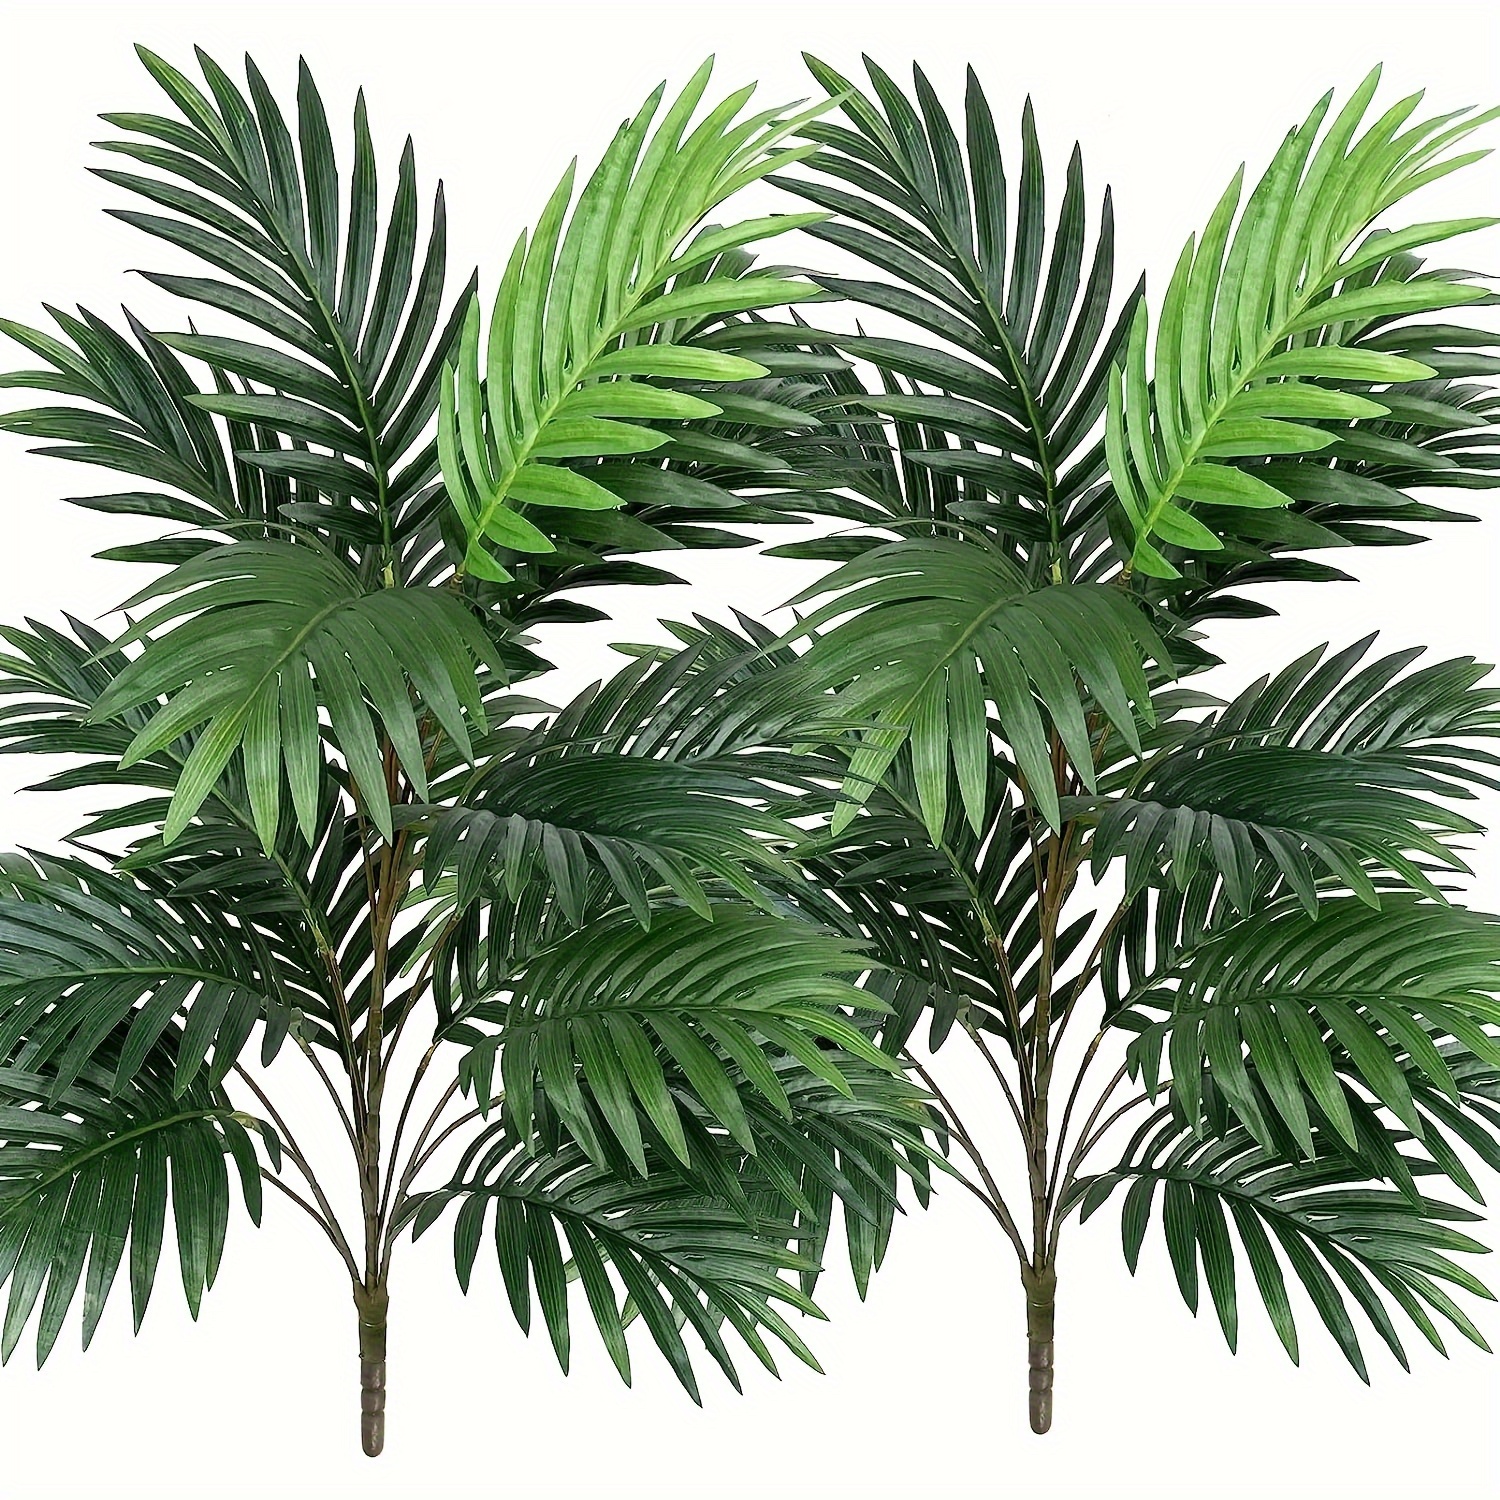 

tropical Elegance" Lifelike Artificial Palm Tree - Uv Protected, 25.6"/28" Tall, Perfect For Home & Party Decor